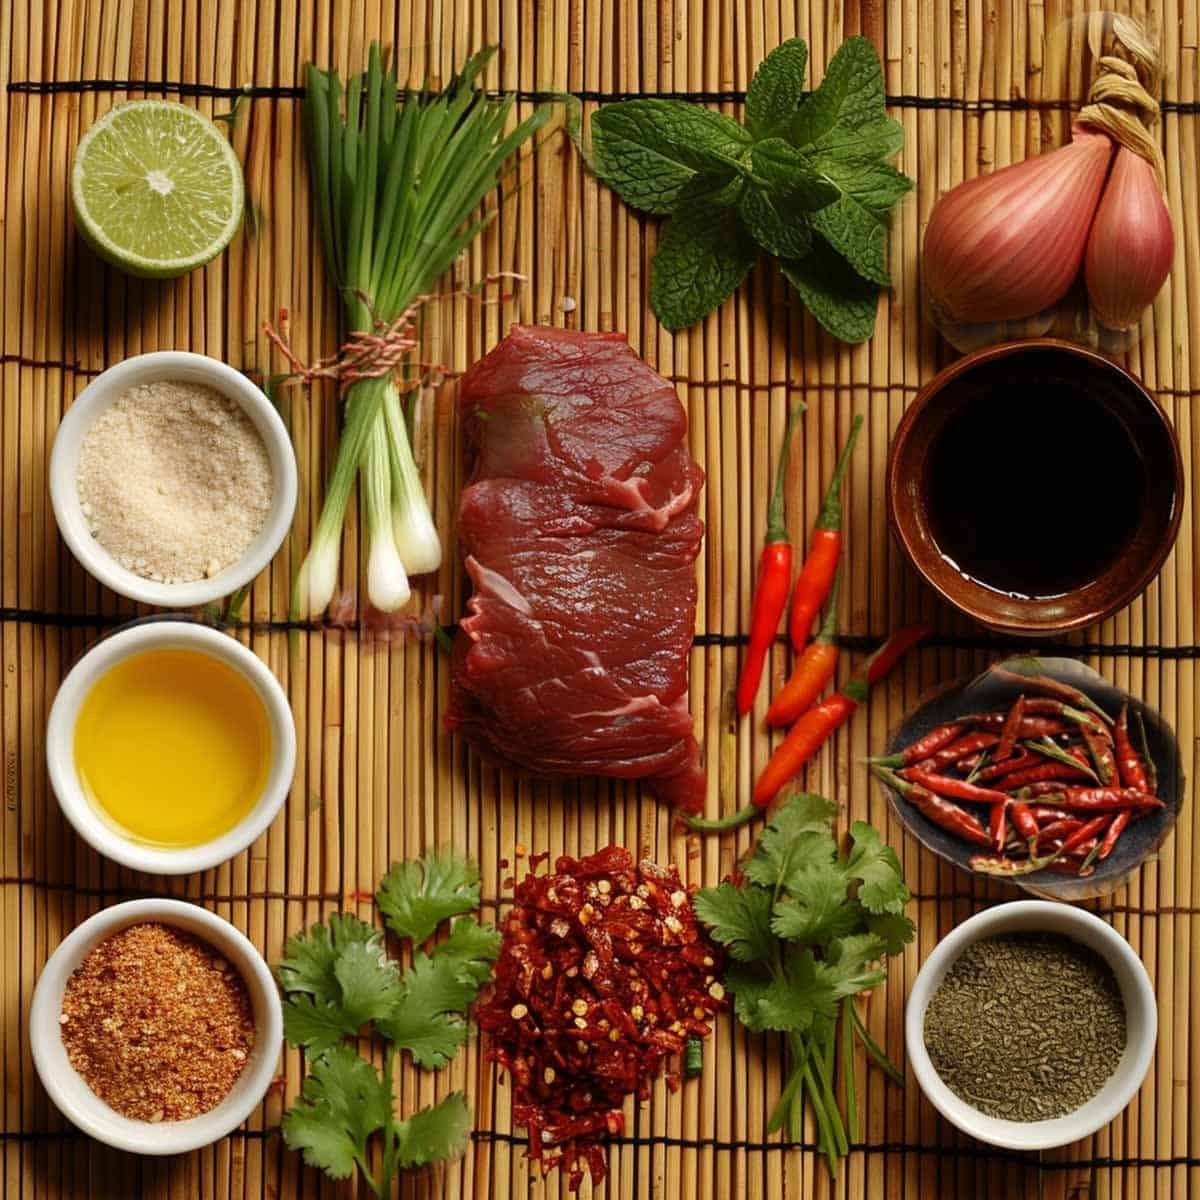 Ingredients for Thai Beef Salad on a bamboo mat: beef, fish sauce, lime, sugar, chili, shallots, herbs, and rice powder